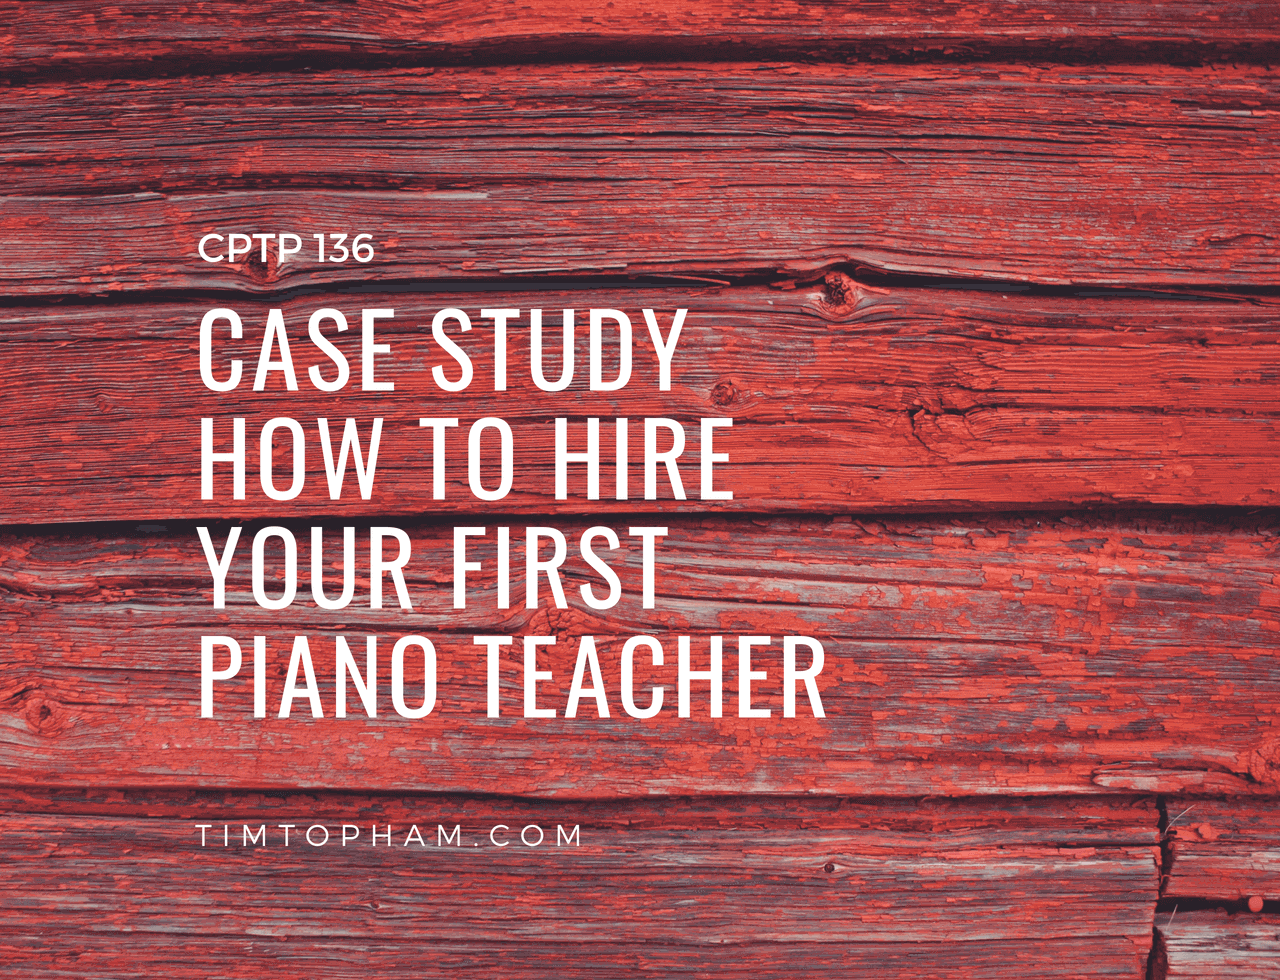 CPTP136_-Case-Study-How-to-hire-your-first-piano-teacher